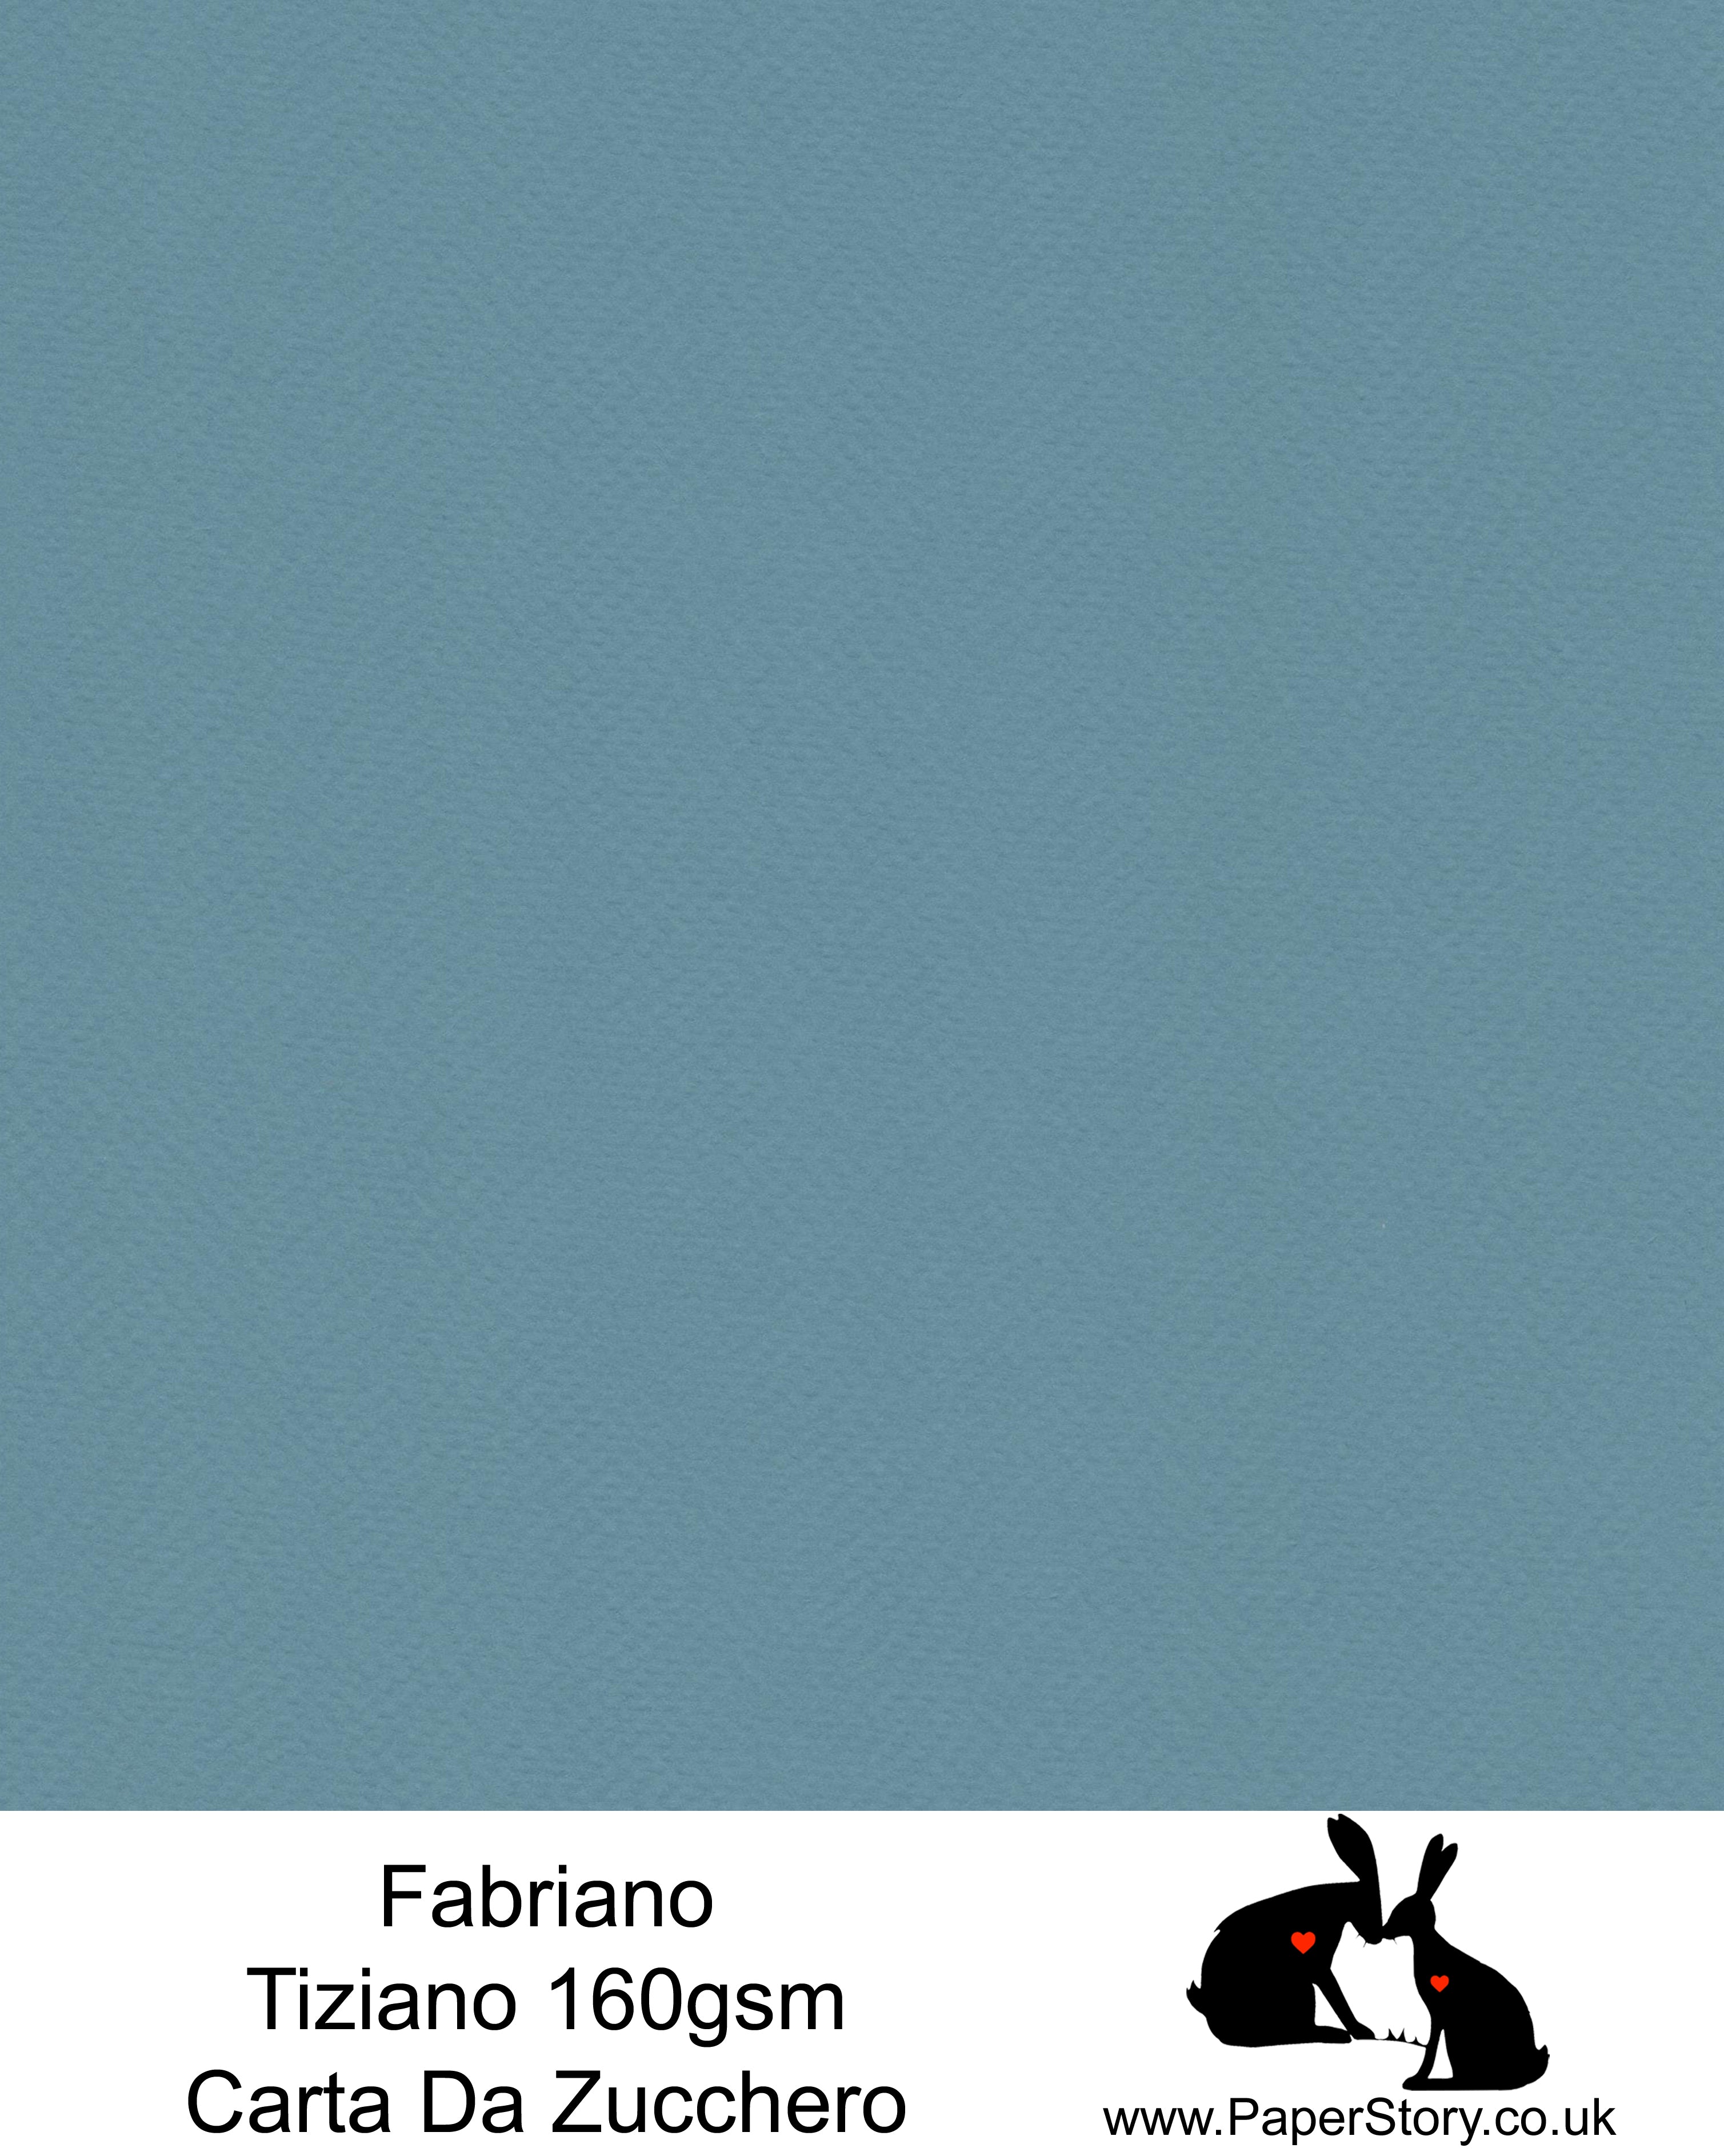 High quality paper from Italy, Cart Da Zucchero soft blue Fabriano Tiziano is 160 gsm, Tiziano has a high cotton content, a textured naturally sized surface. This paper is acid free to guarantee long permanence in time, pH neutral. It has highly lightfast colours, an excellent surface making and sizing which make this paper particularly suitable for papercutting, pastels, pencil, graphite, charcoal, tempera, air brush and watercolour techniques. Tiziano can be used for all printing techniques.